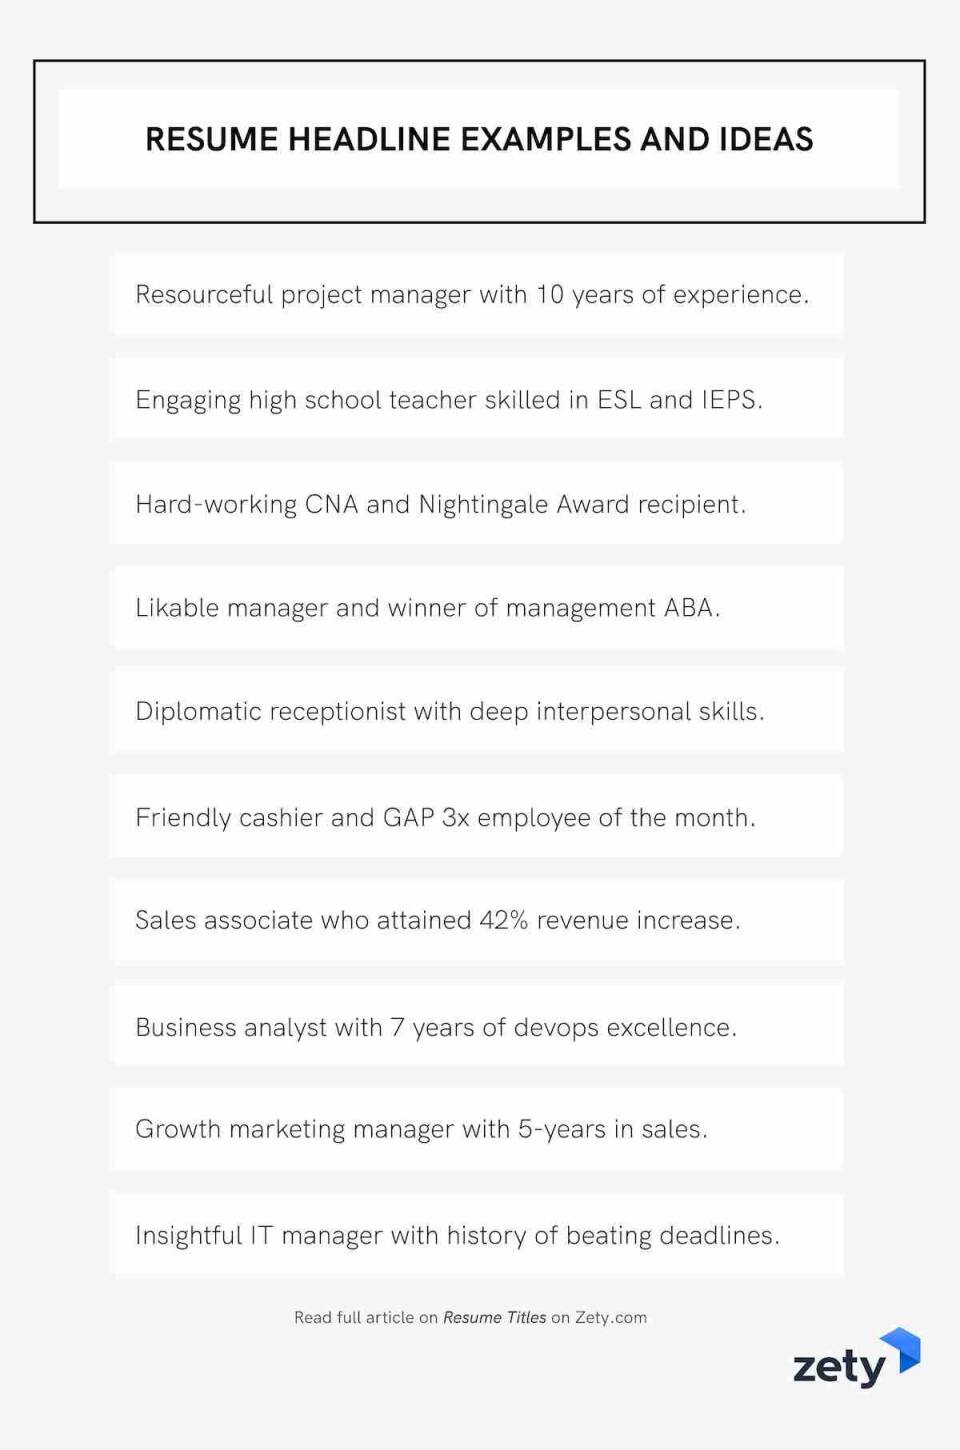 What is a Good Headline for a Resume? 30+ Title Examples